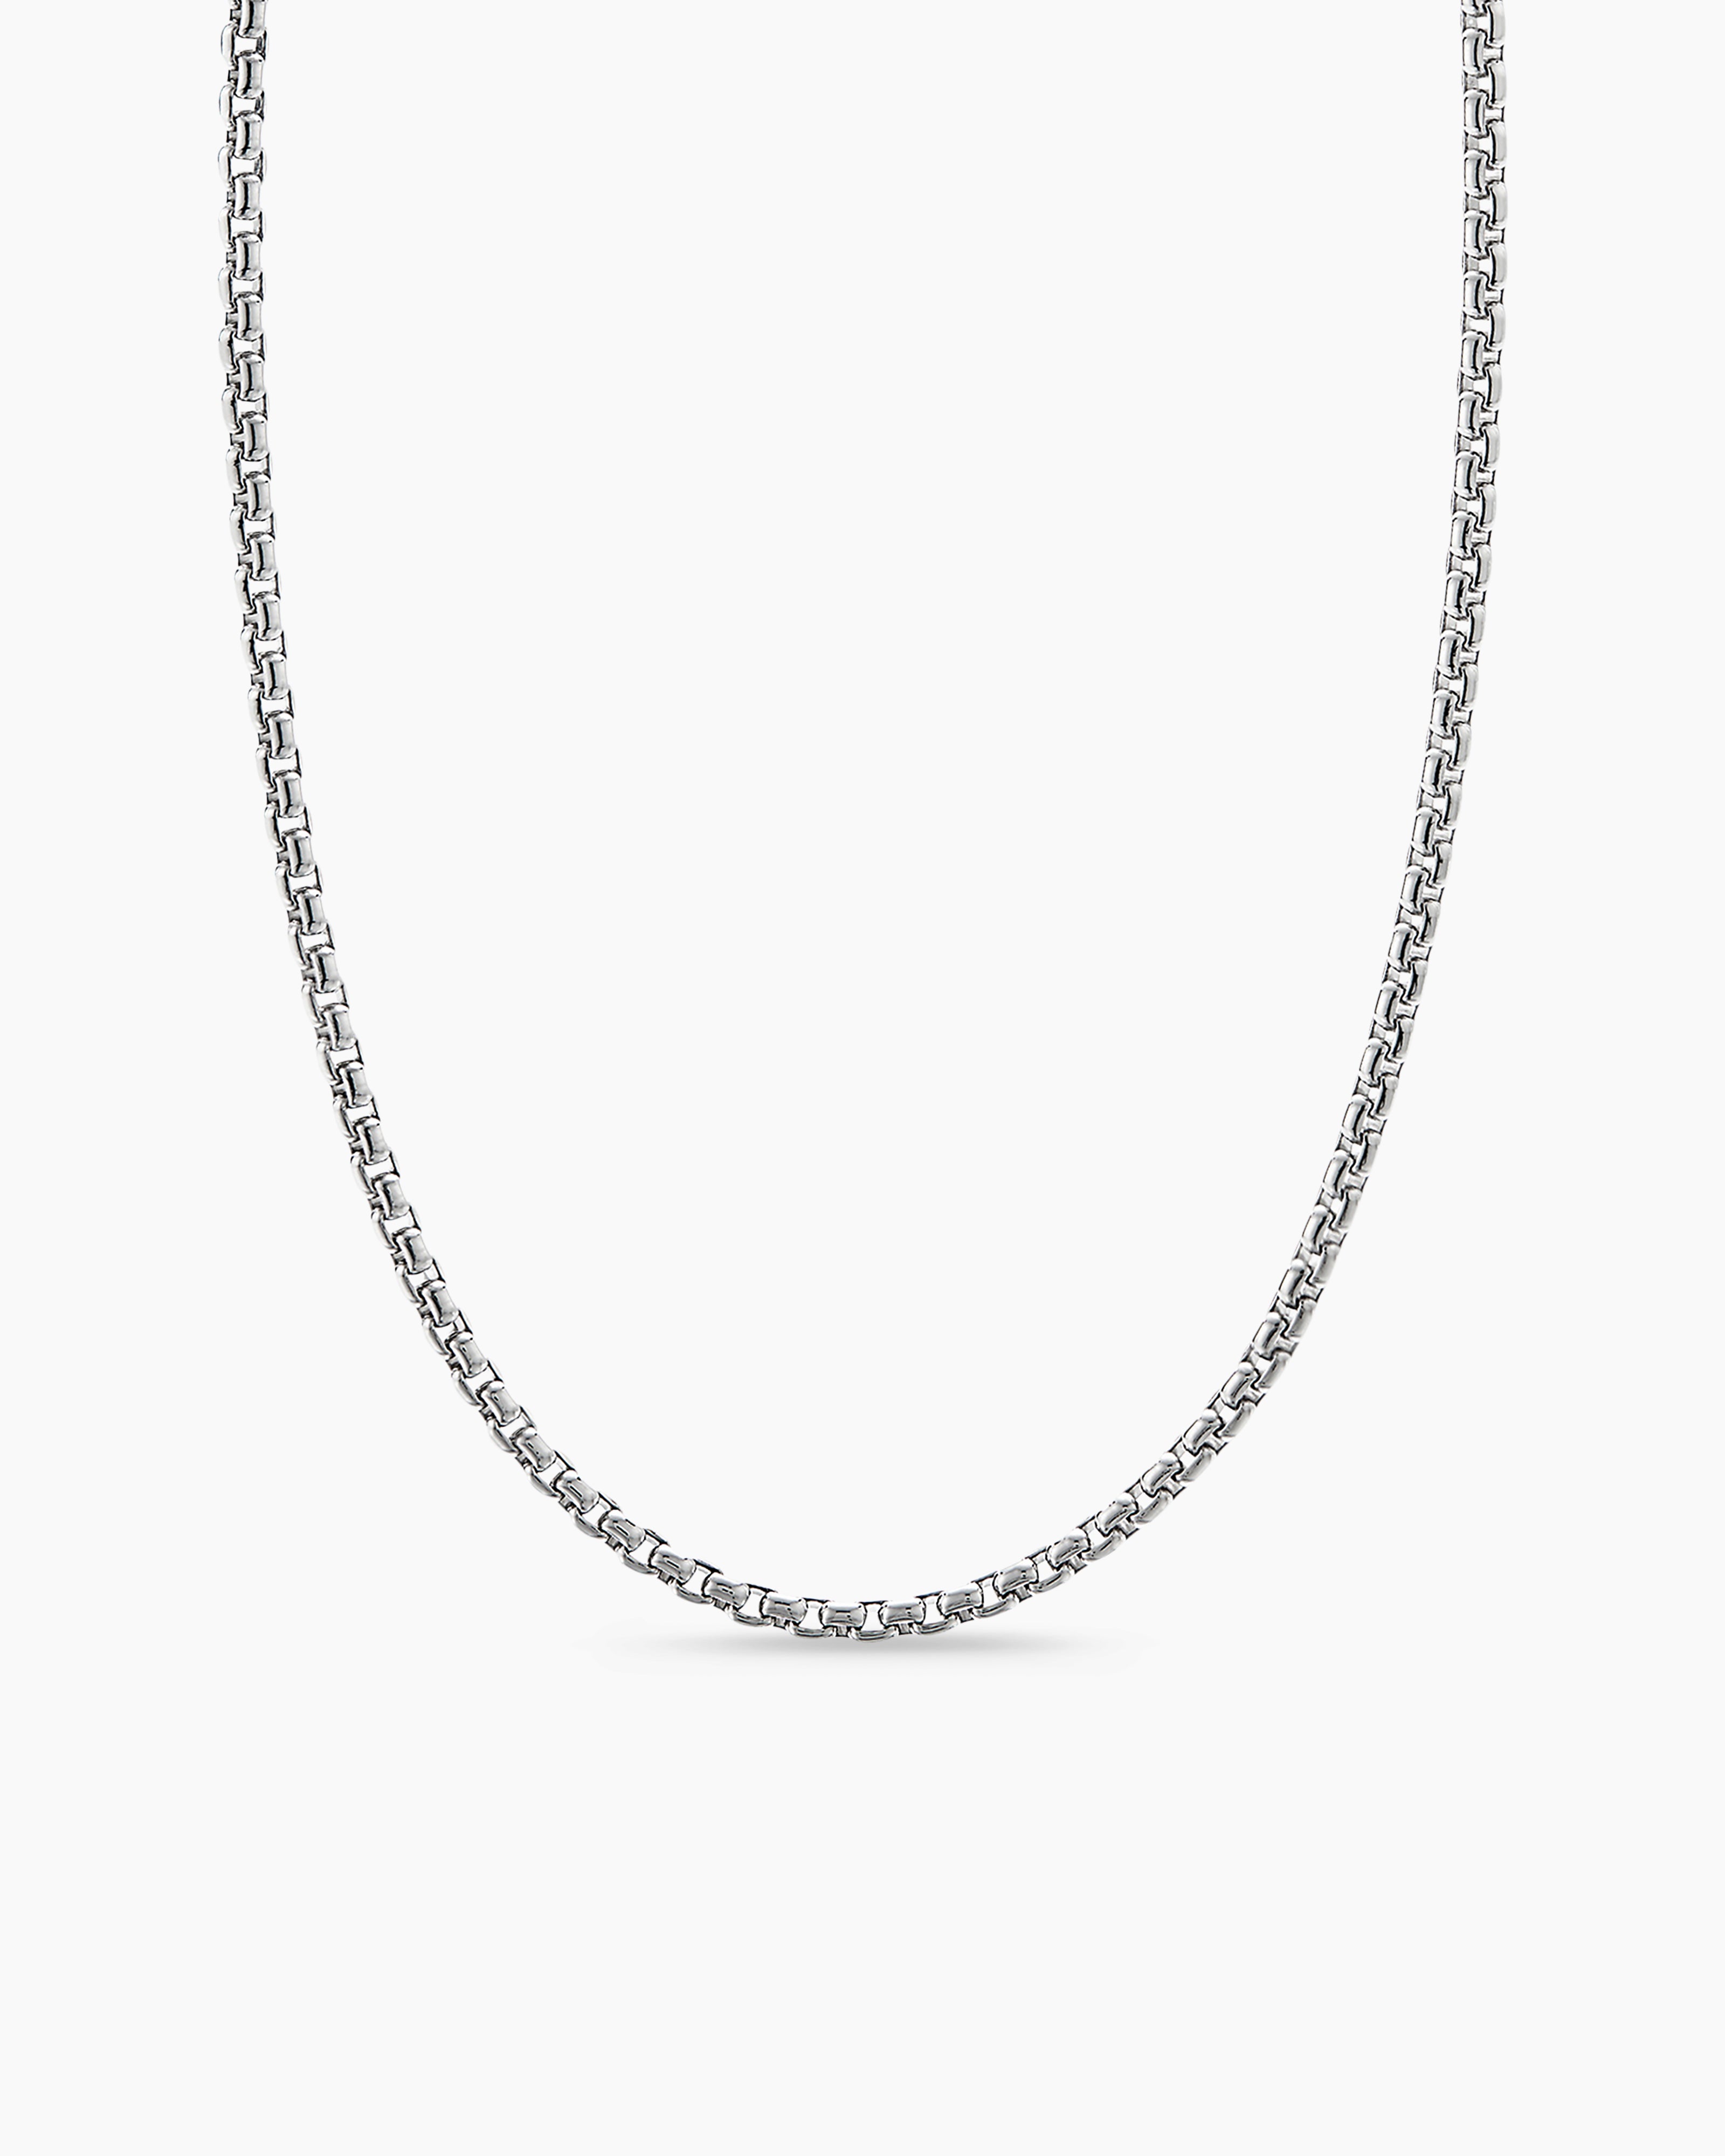 Men's Necklaces & Chains: Silver & Gold Chains | James Avery